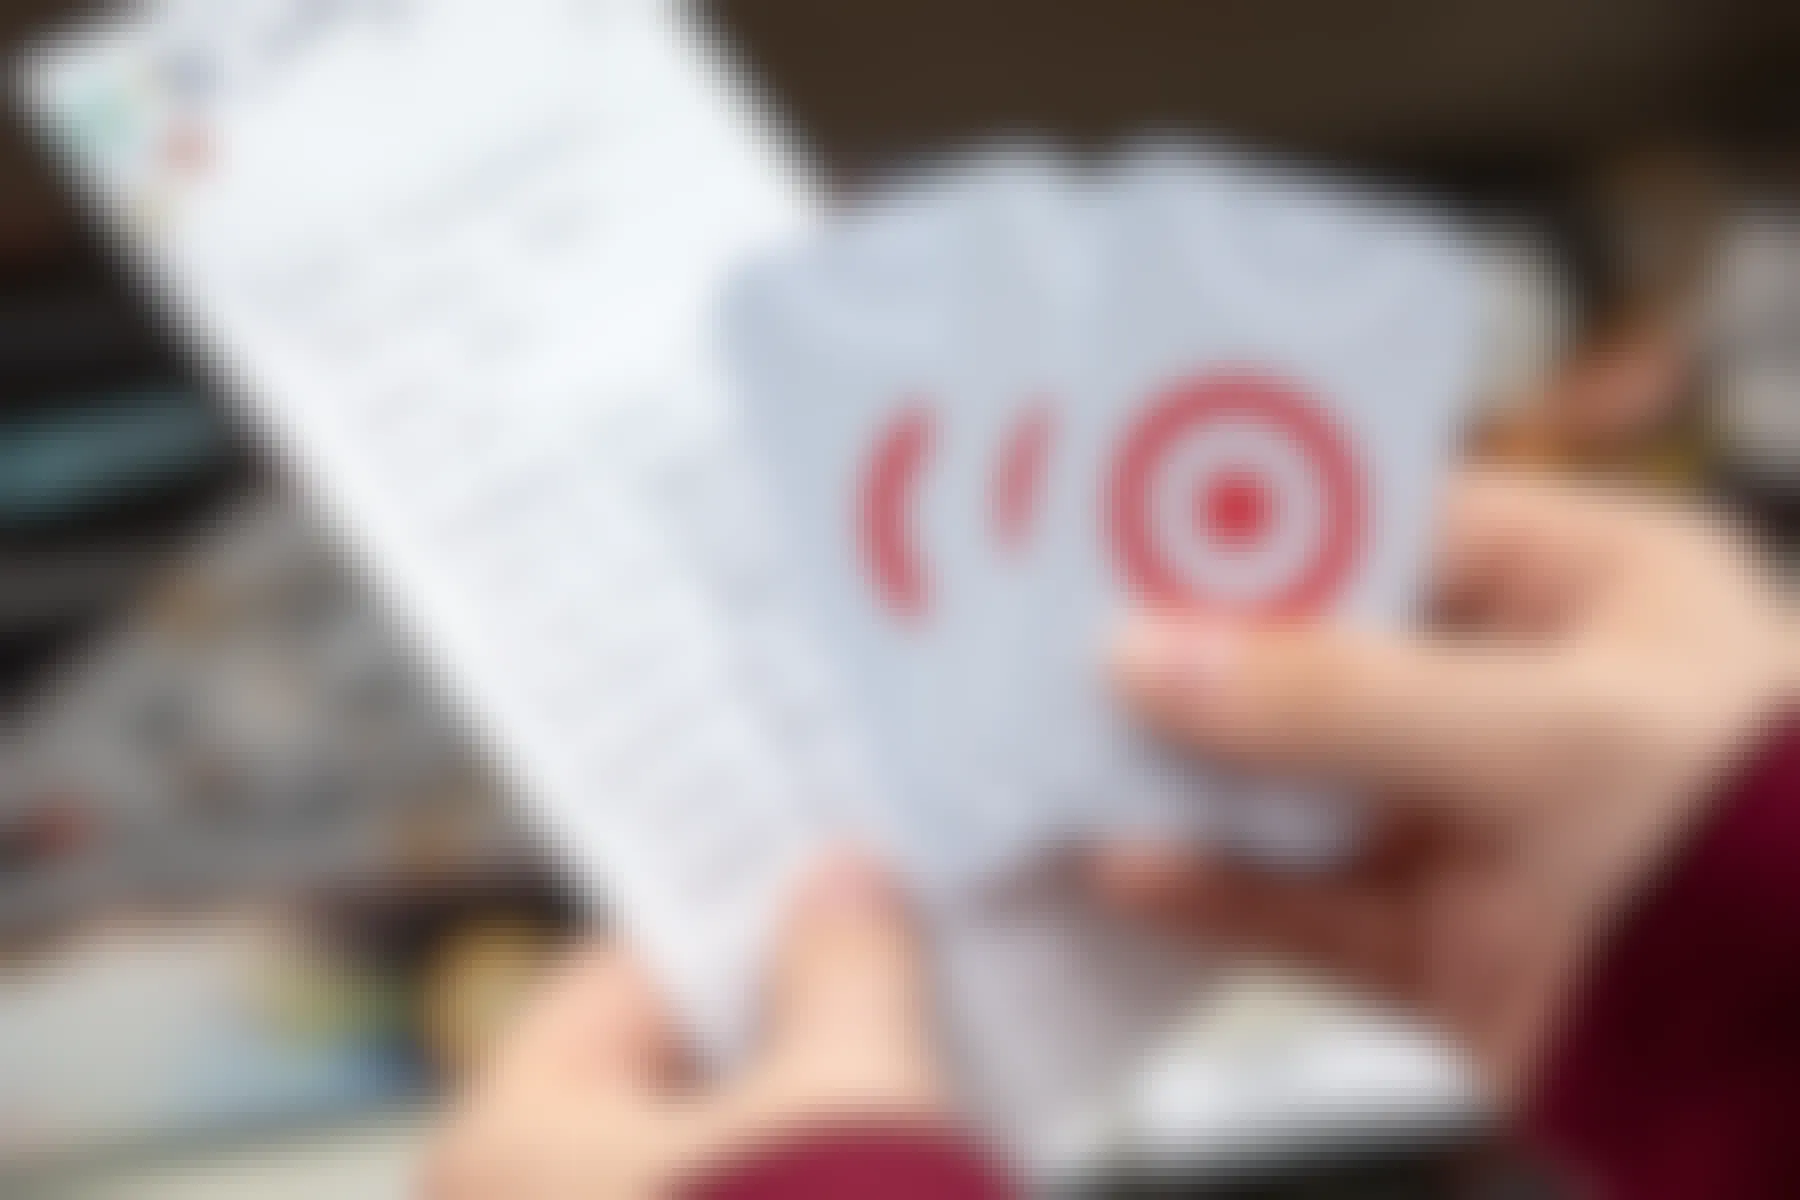 A person holding some Target gift cards and a handwritten Christmas wishlist